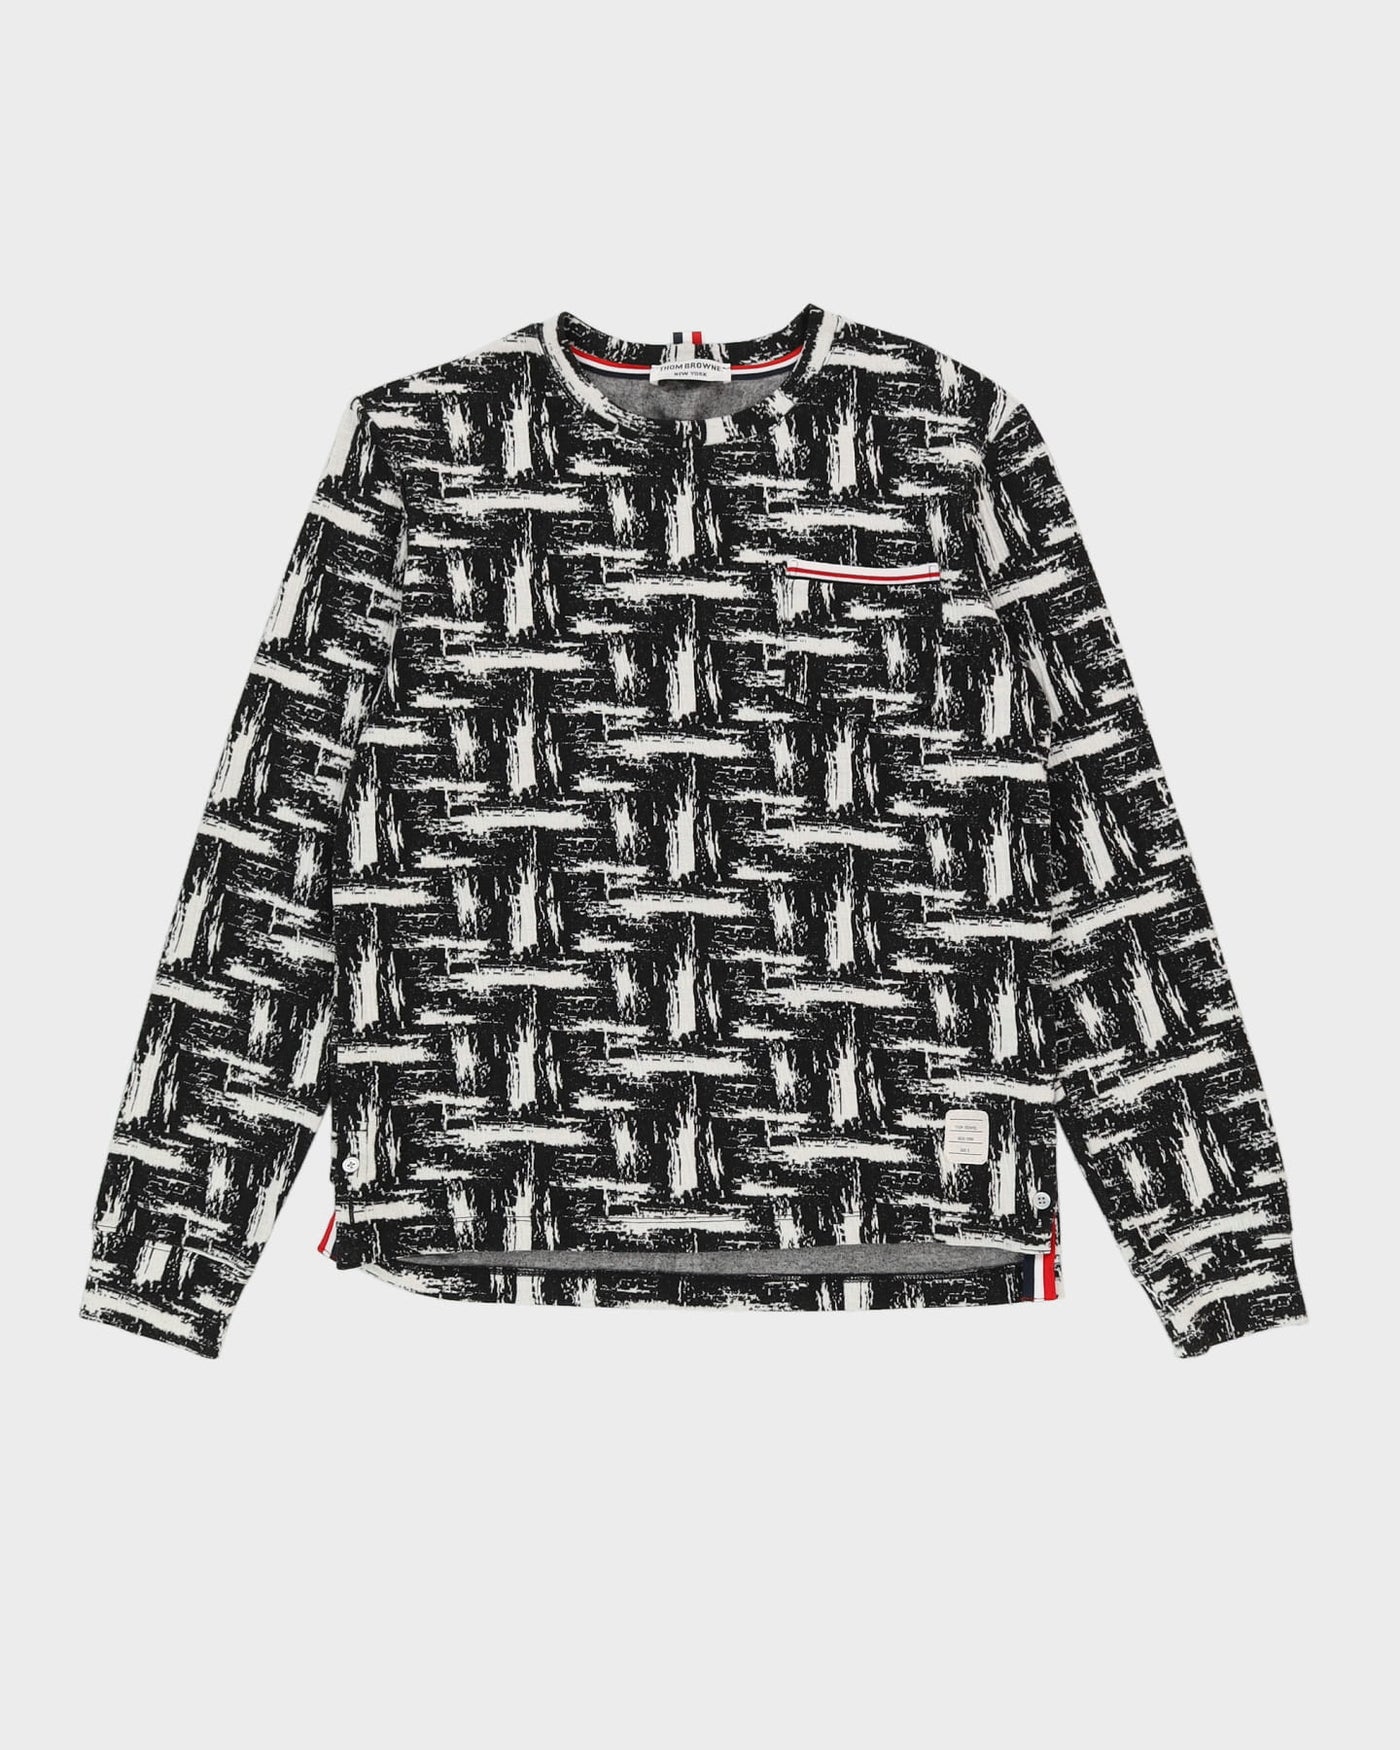 Thom Browne All Over Patterned Jumper - M